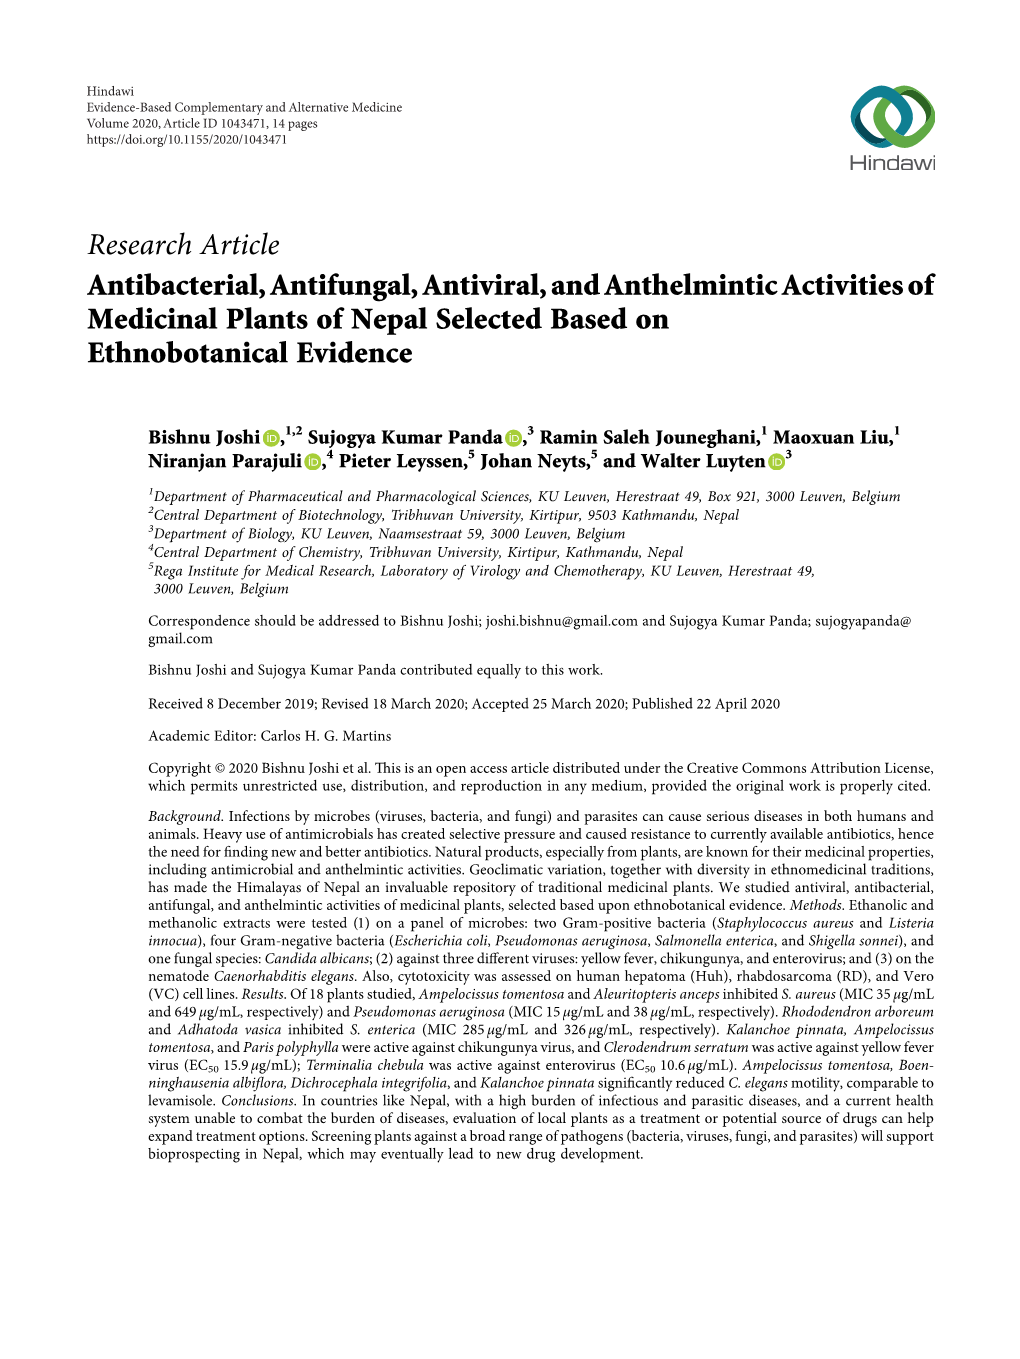 Antibacterial, Antifungal, Antiviral, and Anthelmintic Activities of Medicinal Plants of Nepal Selected Based on Ethnobotanical Evidence